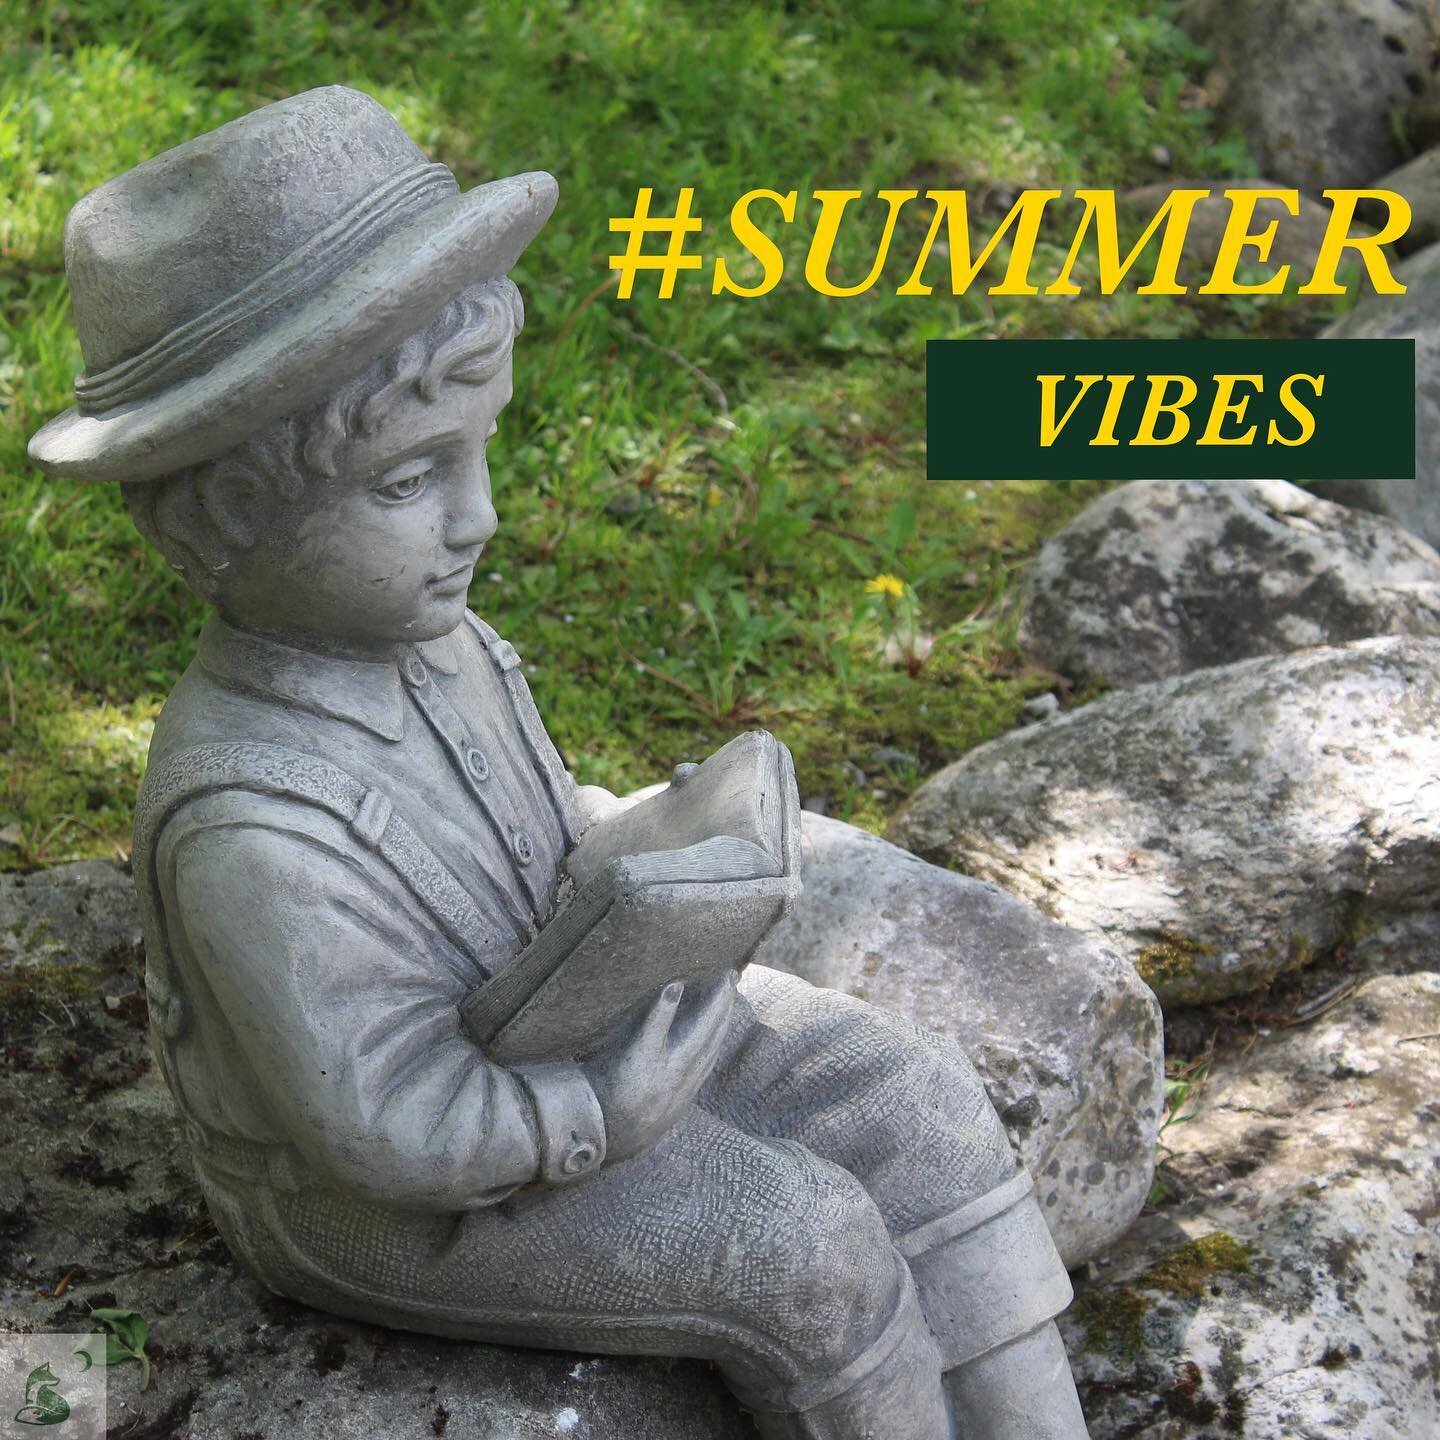 ☀️ It is officially SUMMER ☀️
&bull;&bull;
Today marks the official start to summer and we would love to see you stat with us this season! Get away from everything, relax (maybe with a good book), and enjoy the nature that Vermont has to offer.
&bull